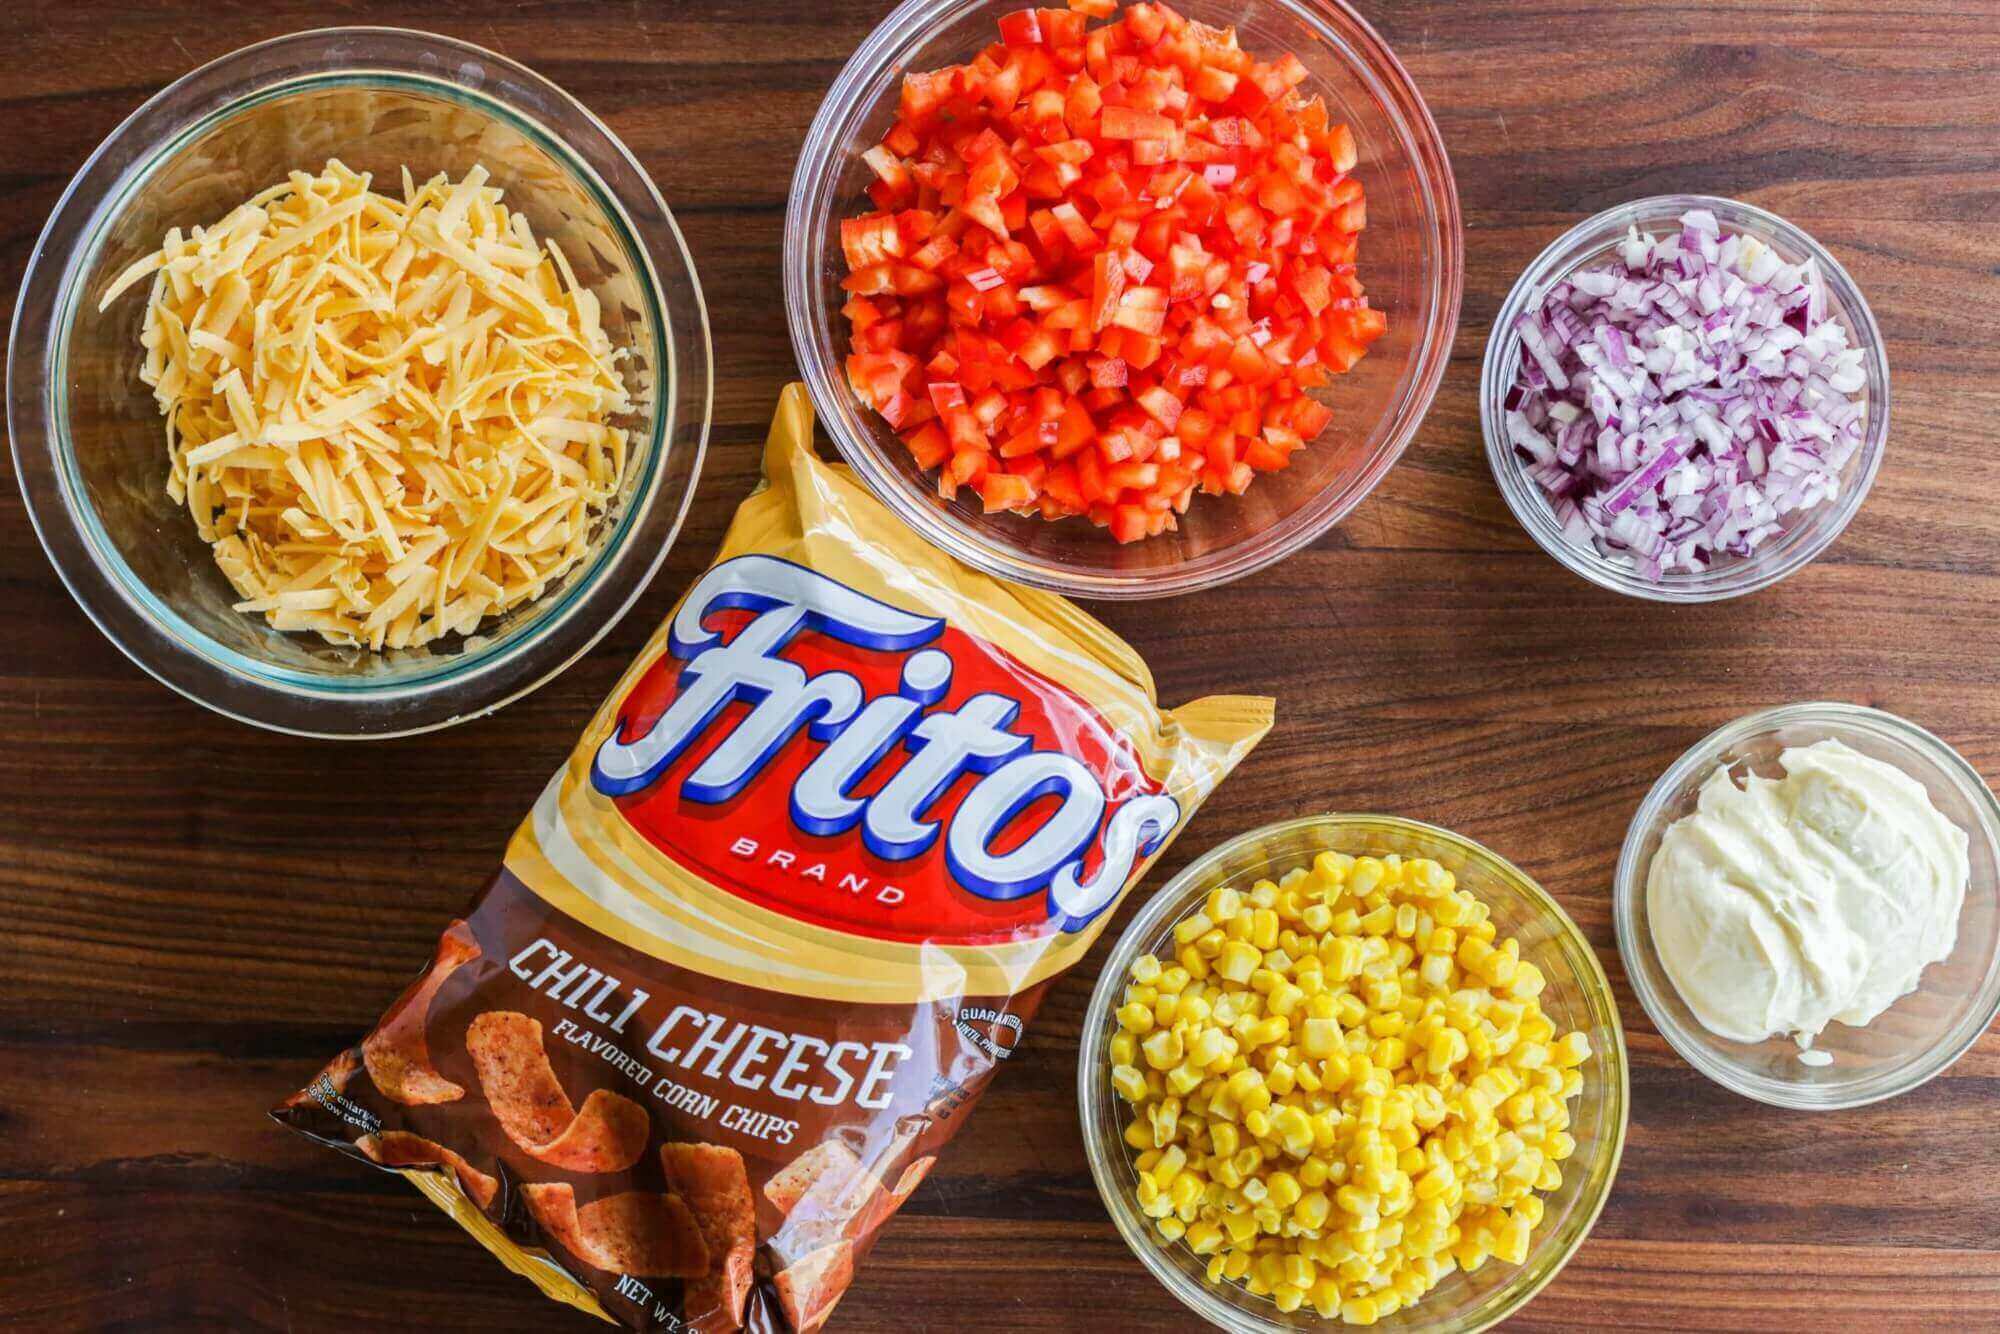 19-chili-cheese-fritos-nutrition-facts